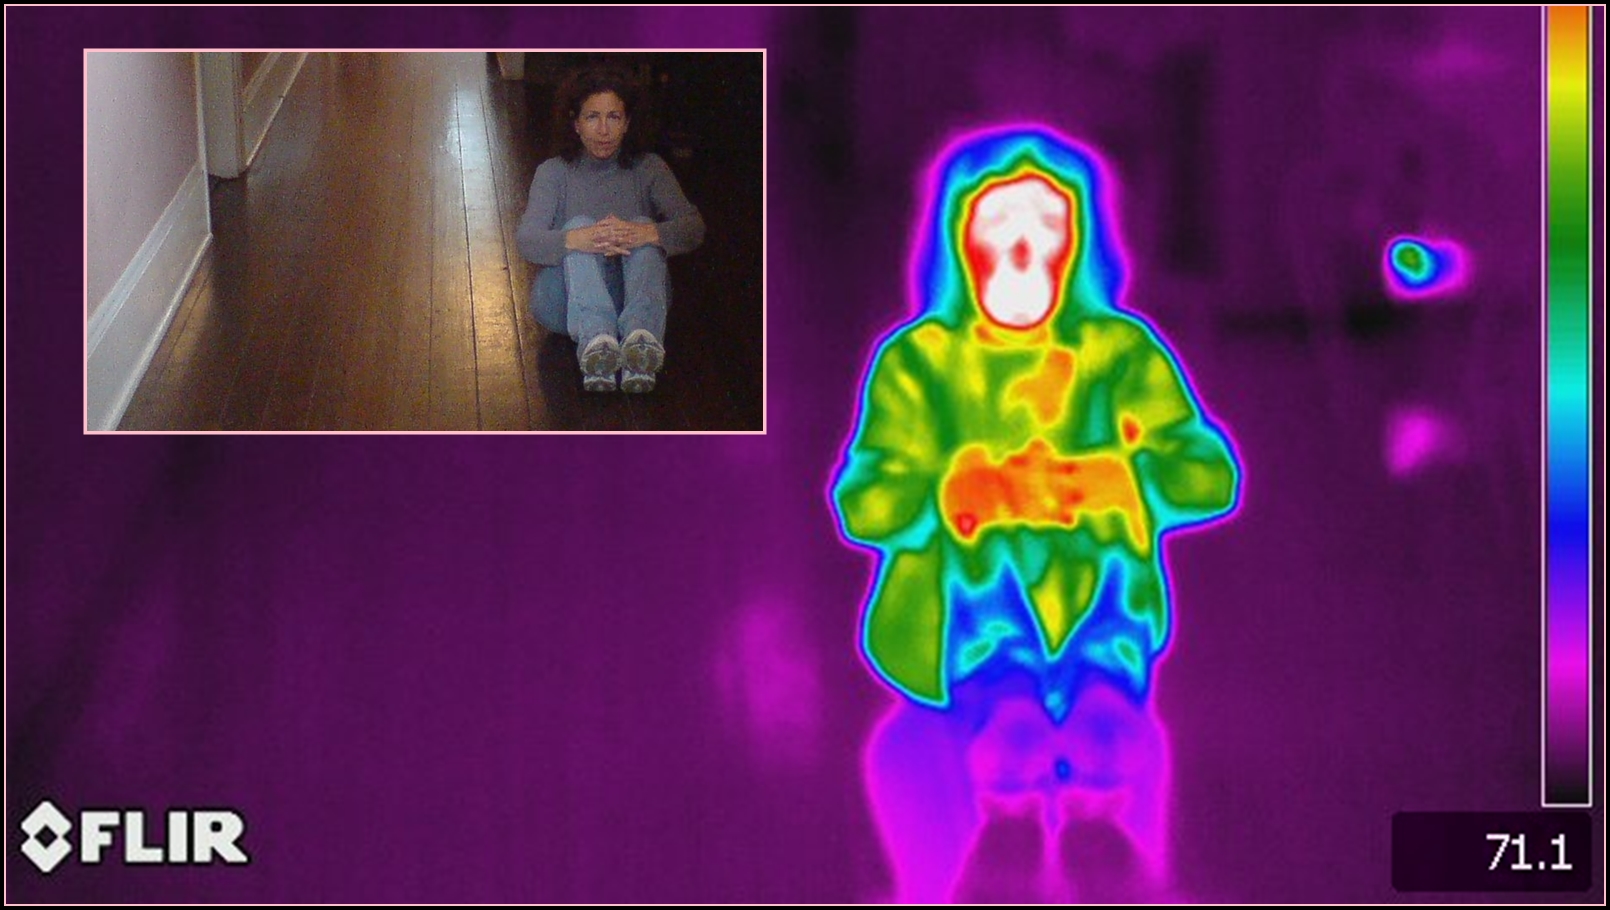 Daena Smoller participates in Dr. Larry Montz' testing of a brand new FLIR camera model in 2009 at the Degas House in New Orleans.